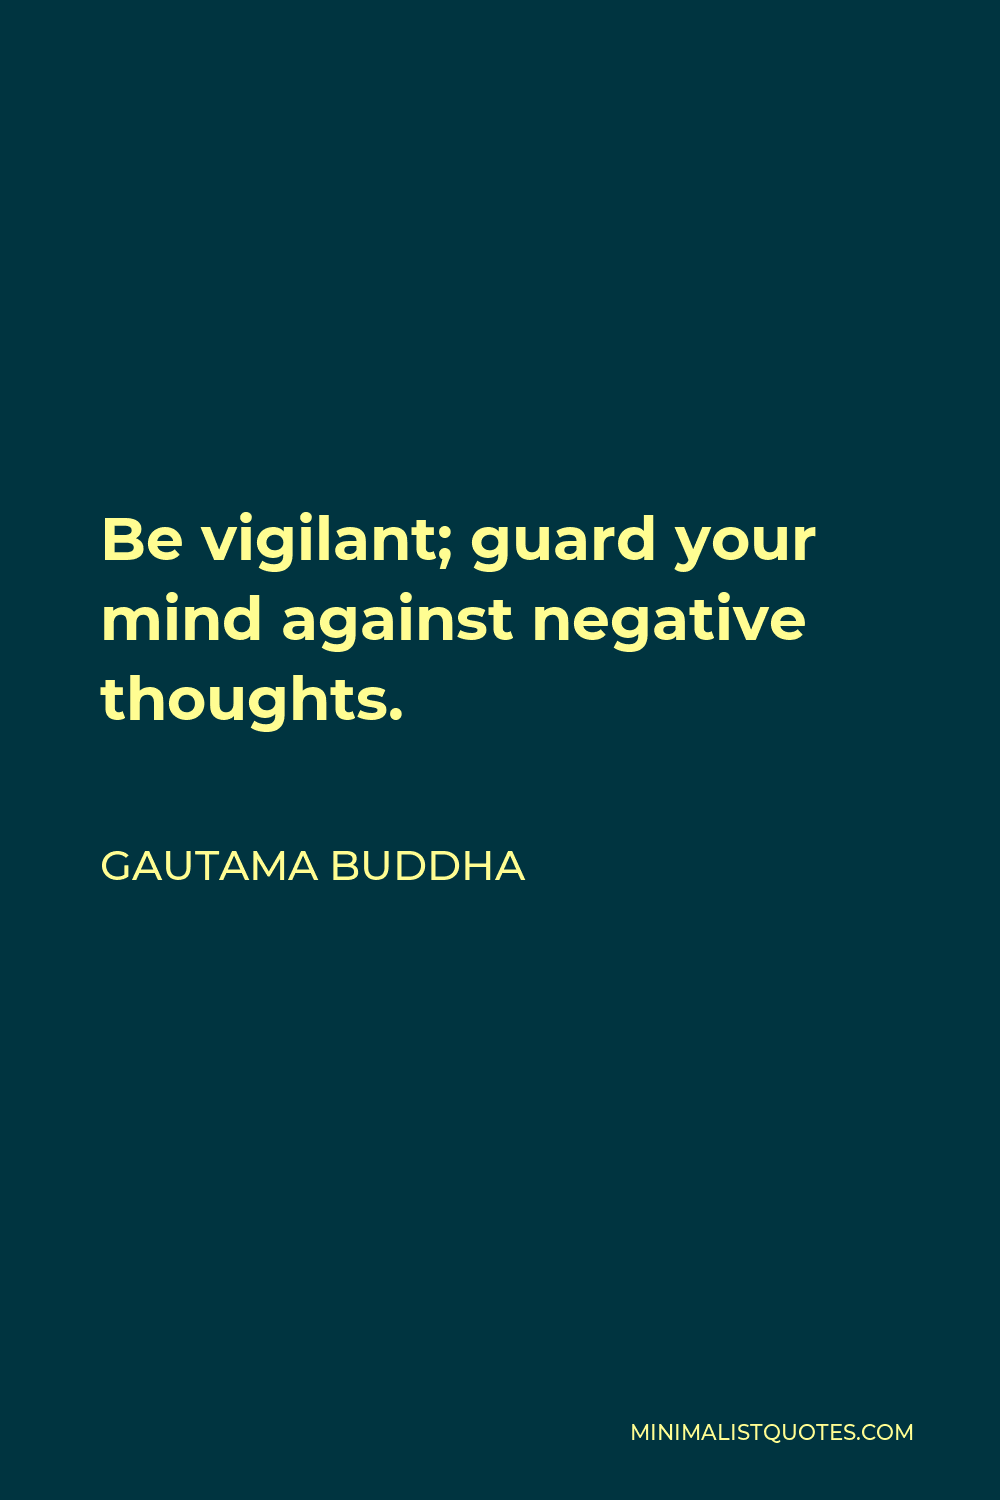 Gautama Buddha Quote - Be vigilant; guard your mind against negative thoughts.